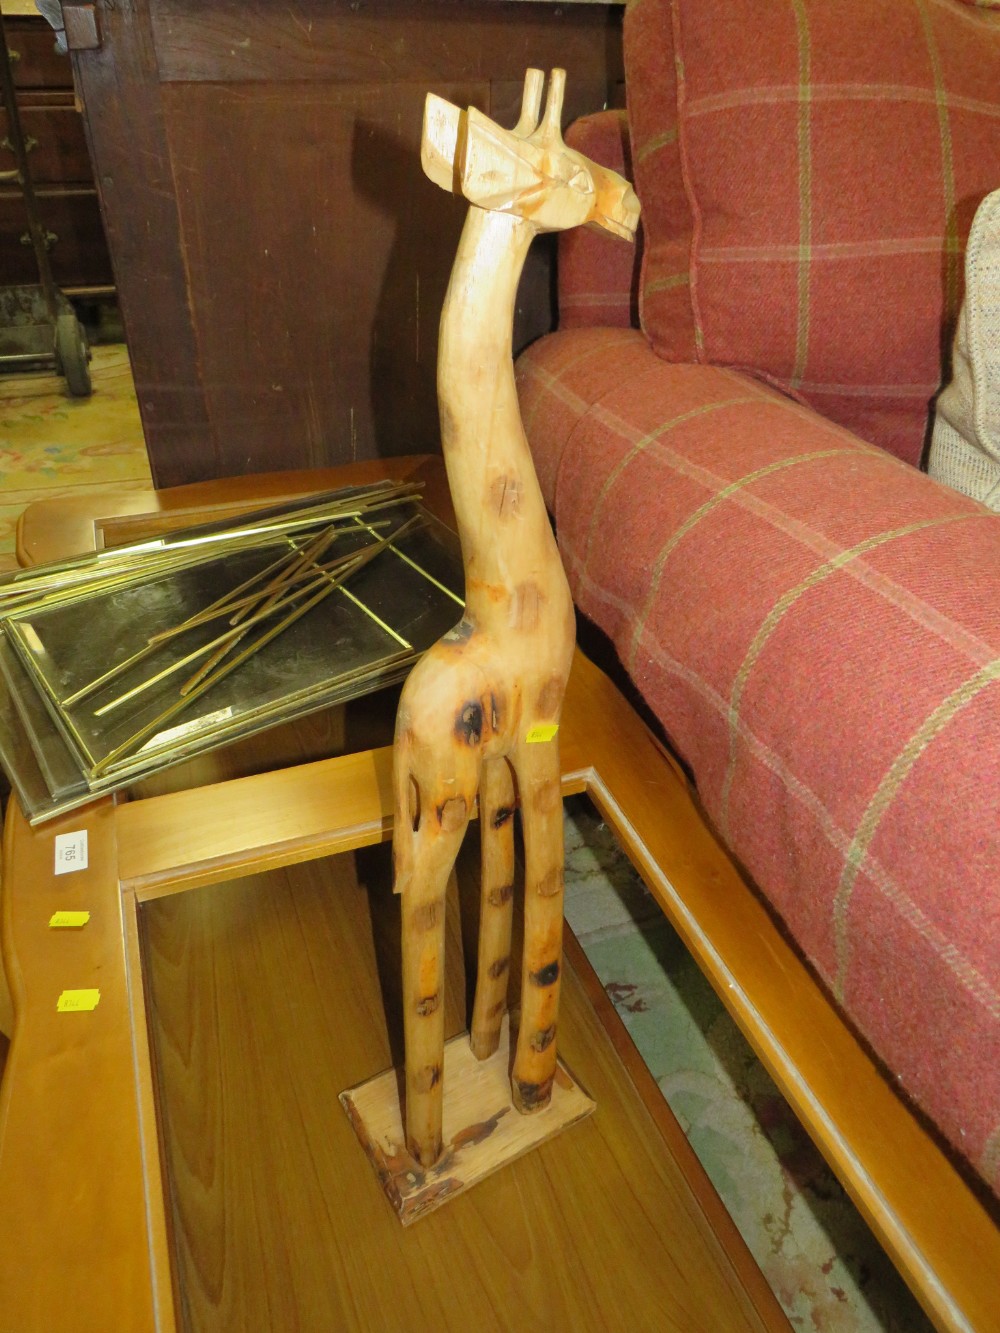 A MODERN GLASS TOPPED COFFEE TABLE, LAMP TABLE AND NEST OF TABLES TOGETHER WITH A GIRAFFE - Image 4 of 4